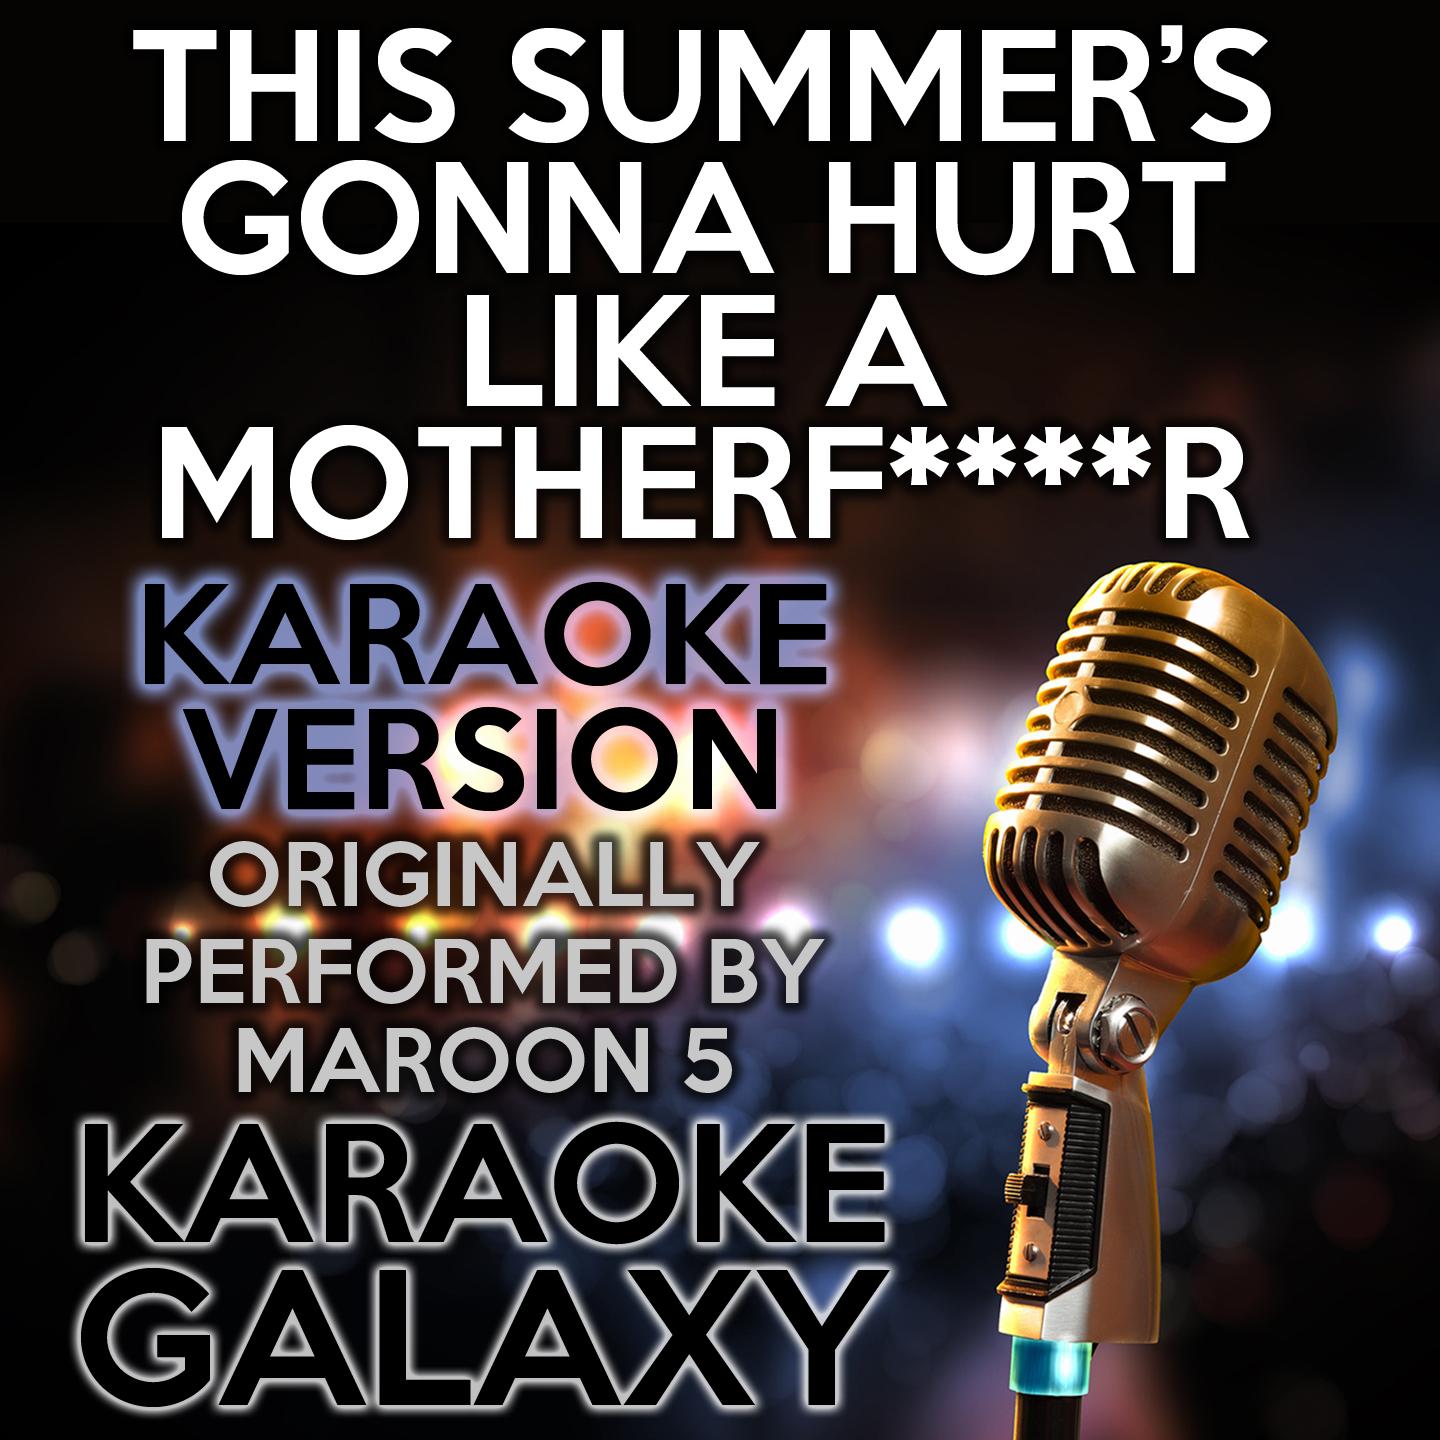 This Summer's Gonna Hurt Like a ************ (Karaoke Version) (Originally Performed By Maroon 5)